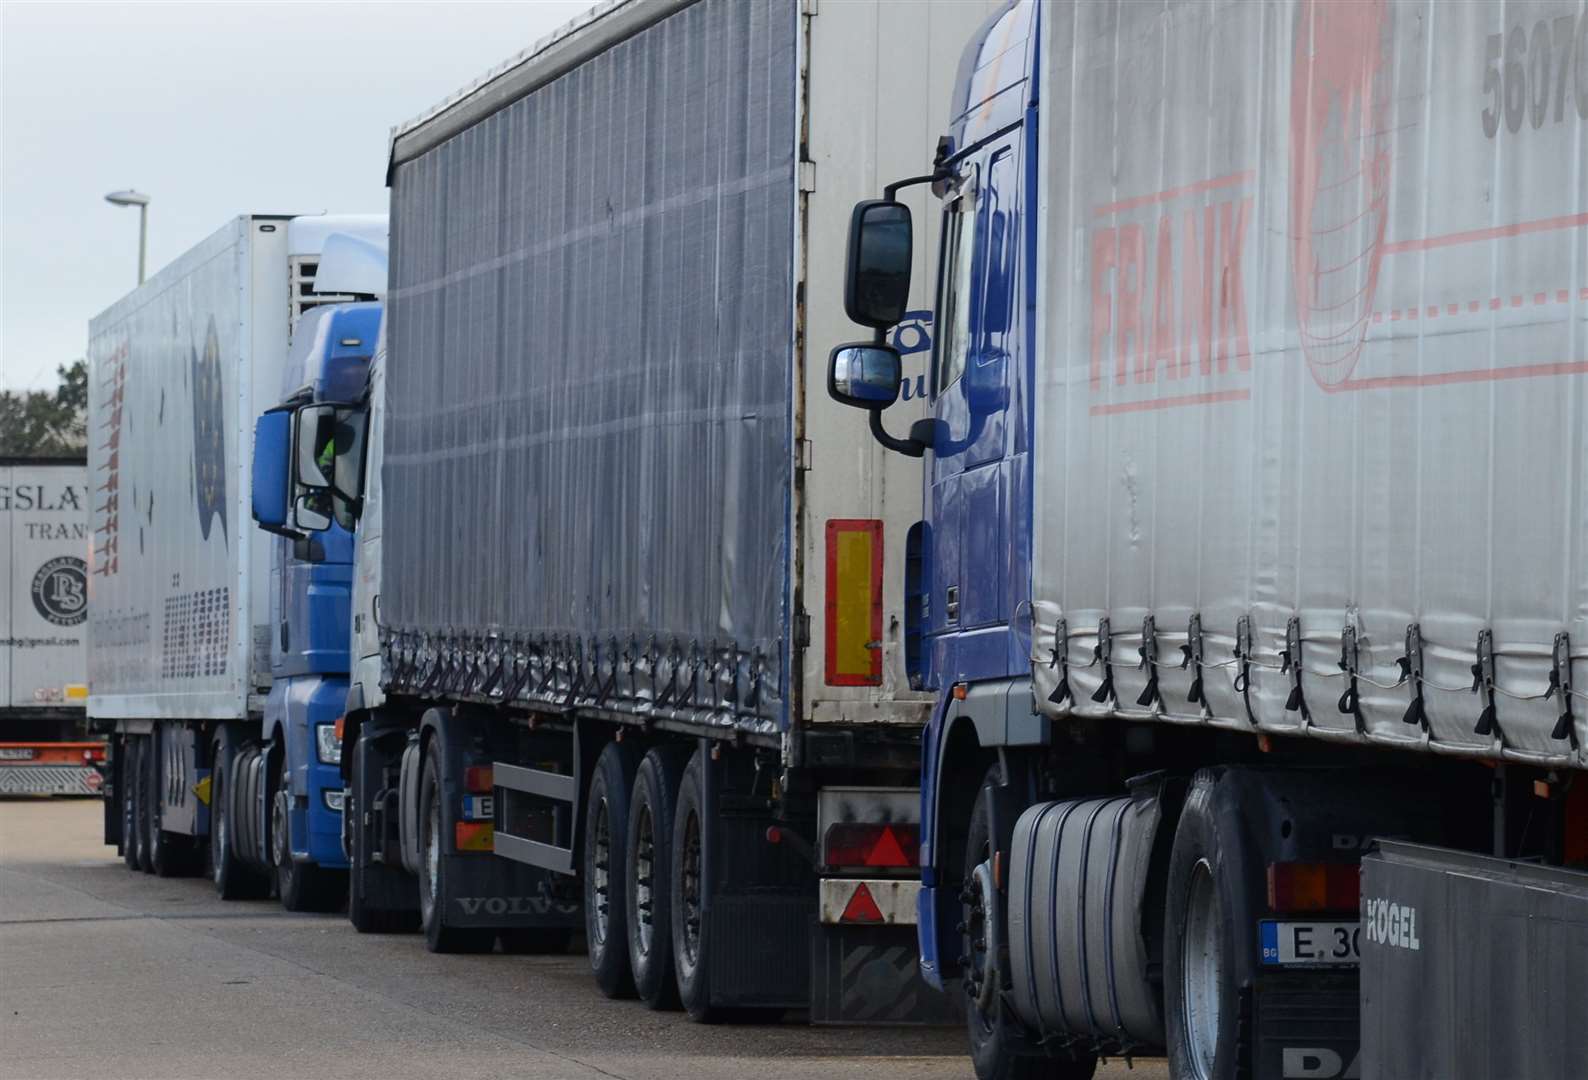 There are concerns Ashford will be unable to cope with the lorries heading to the site